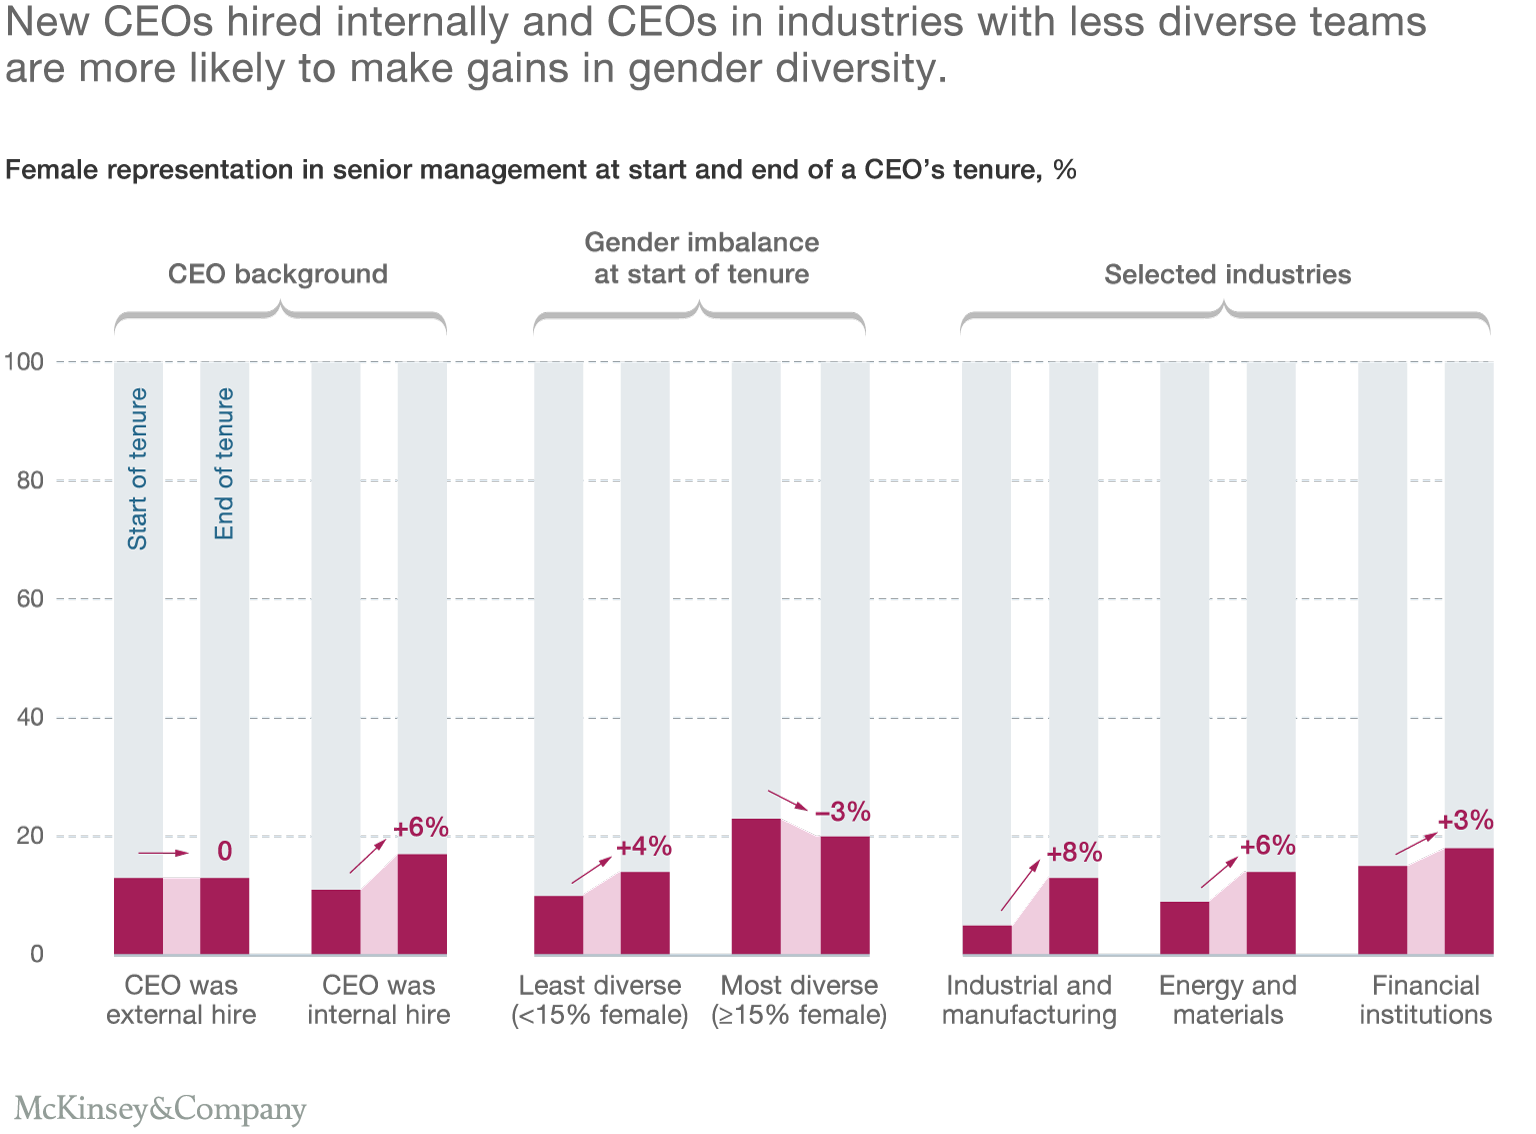 New CEOs hired internally and CEOs in industries with less diverse teams are more likely to make gains in gender diversity.